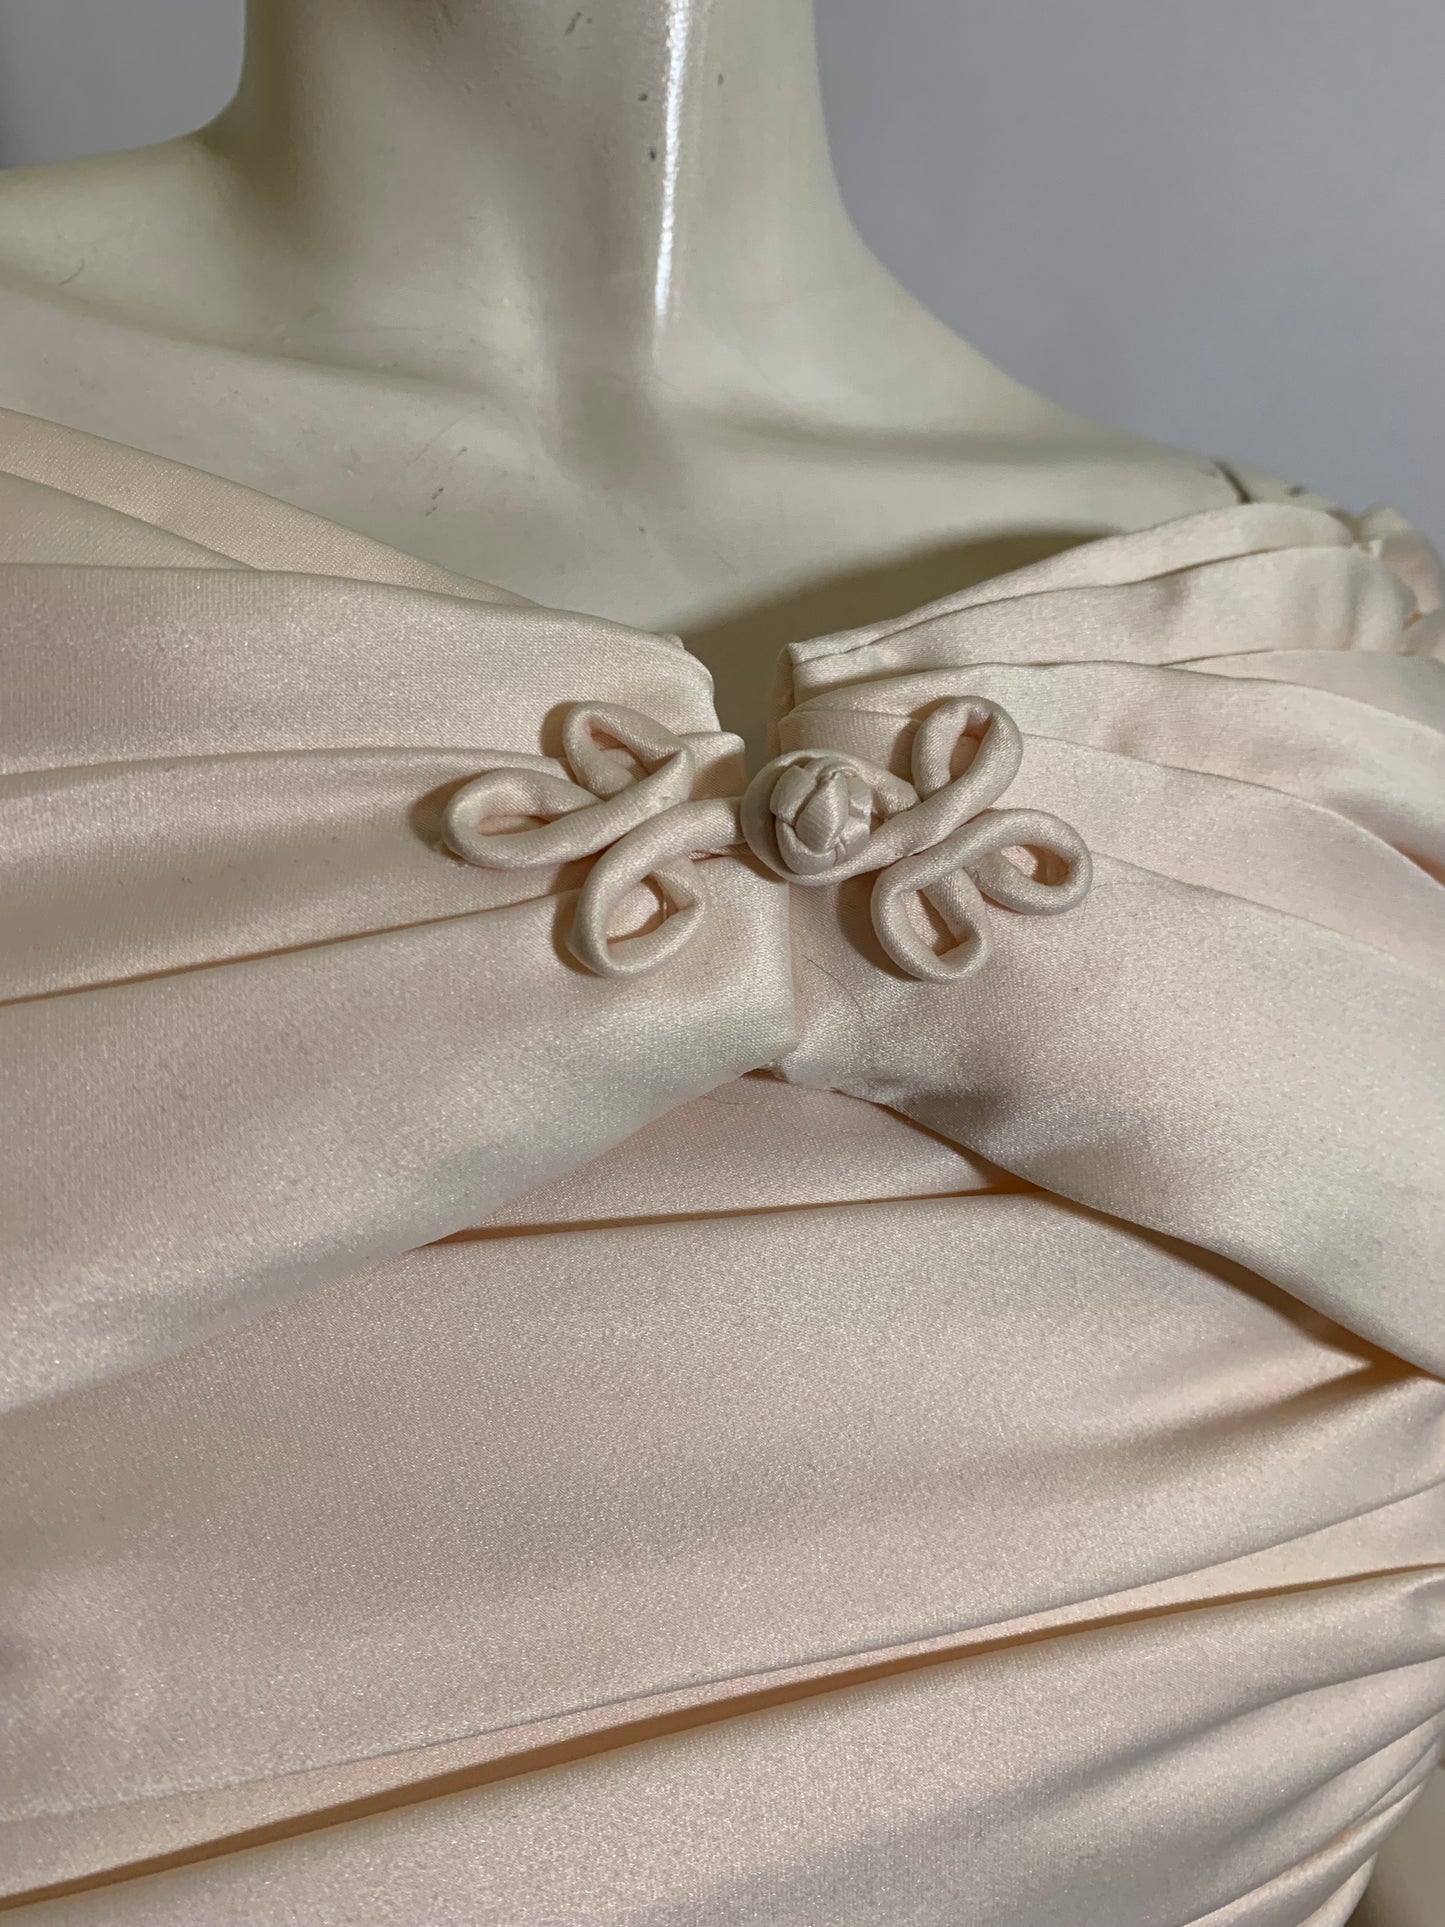 Pale Champagne Strapless Evening Gown with Ruched Shoulder Wrap circa 1980s